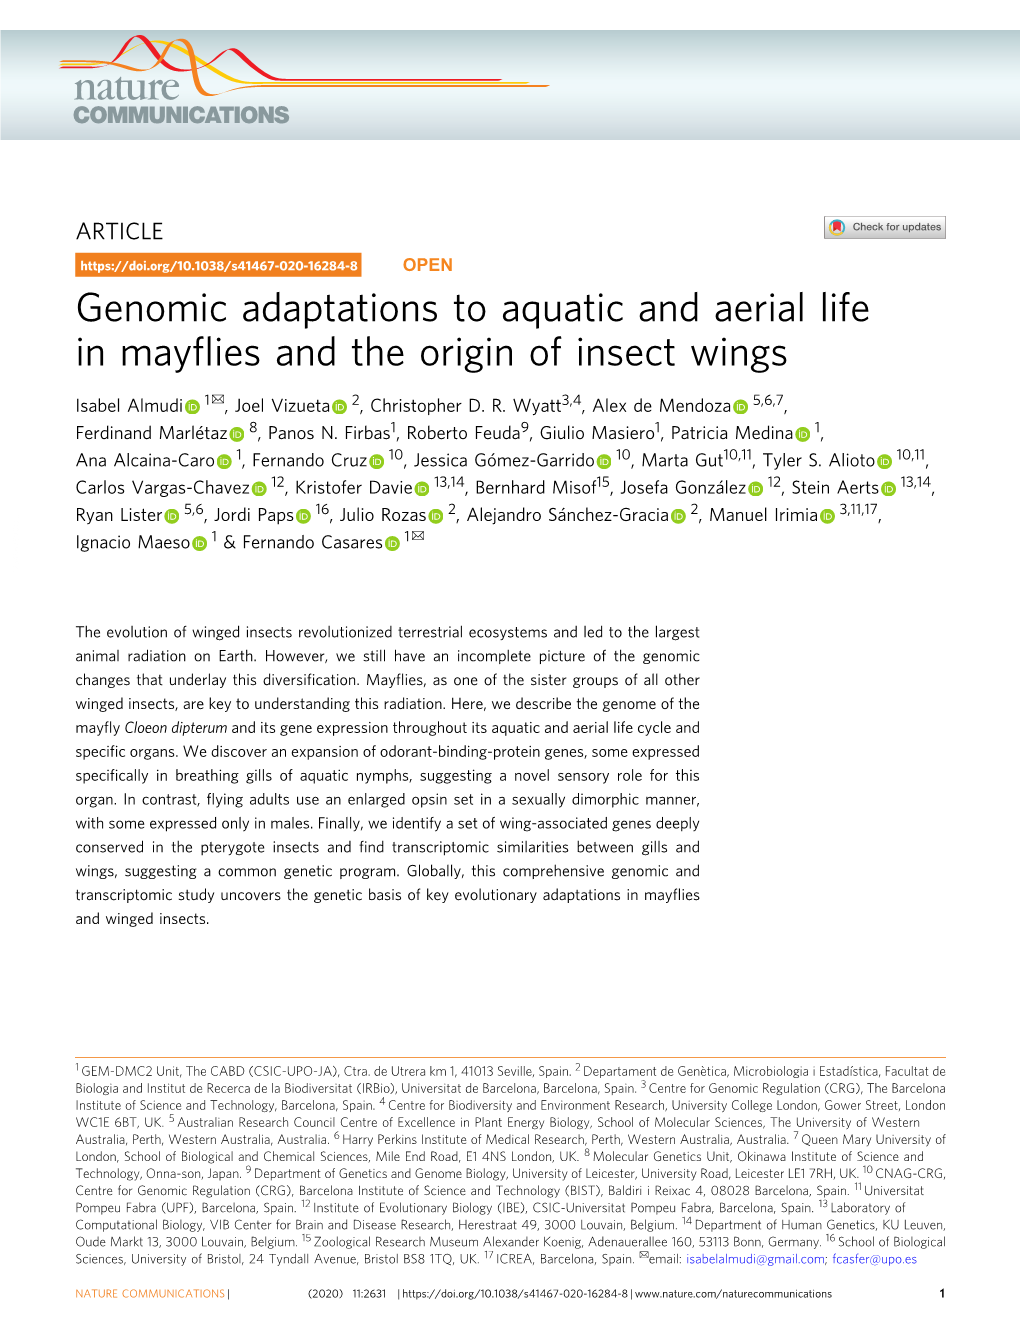 Genomic Adaptations to Aquatic and Aerial Life in Mayflies and the Origin of Insect Wings